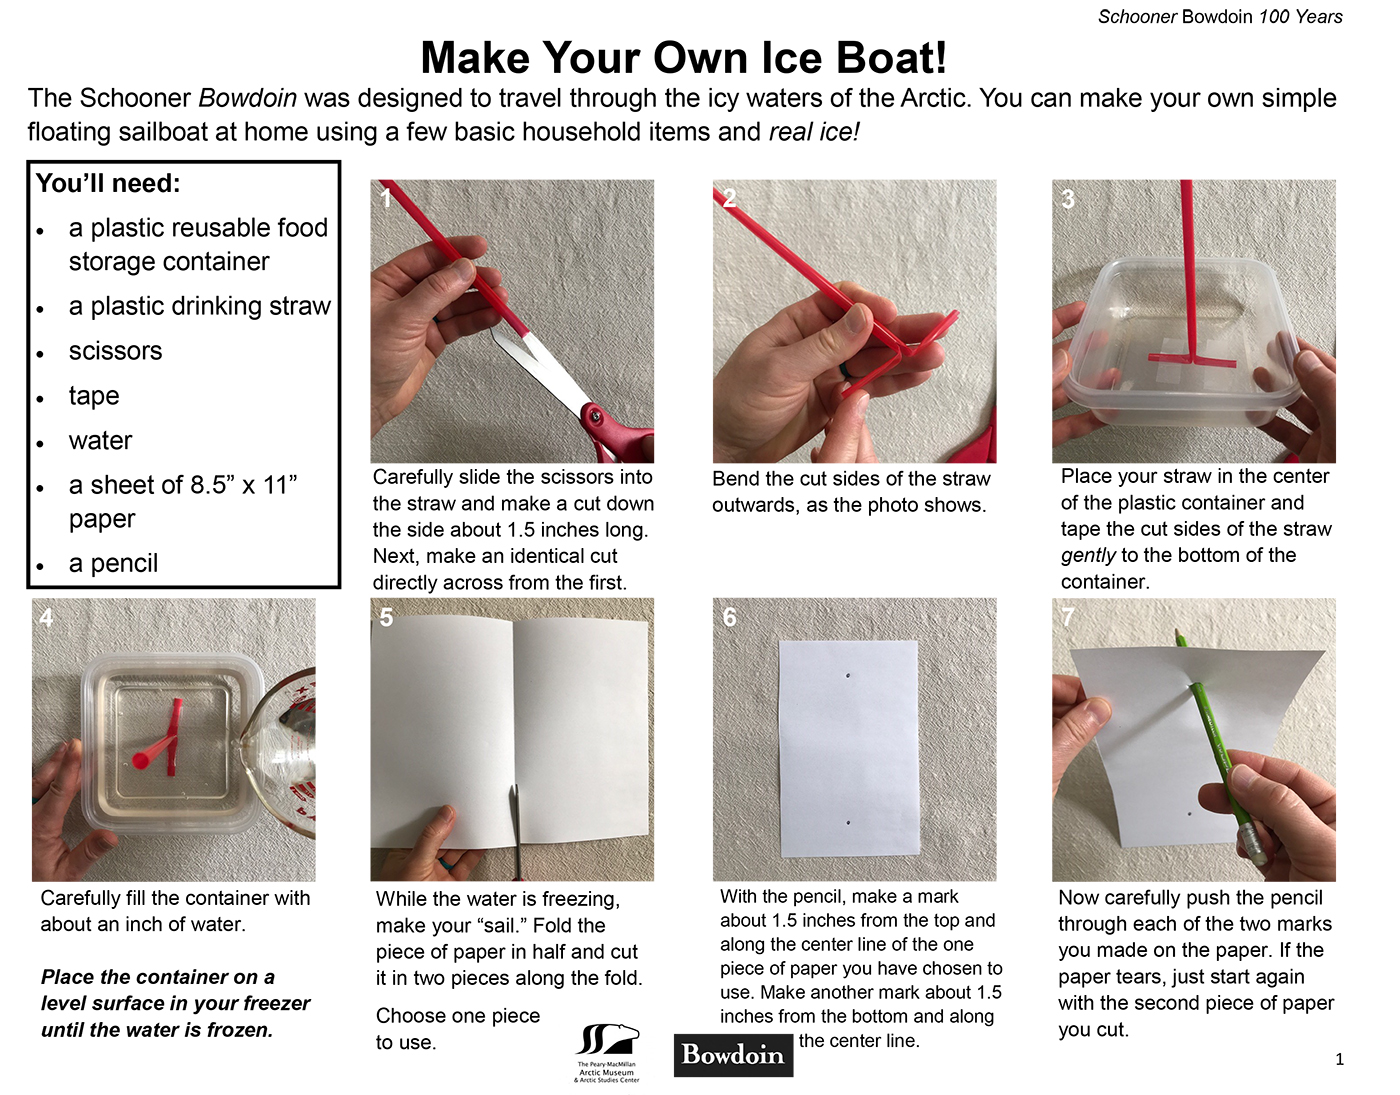 Make your own ice boat instructions